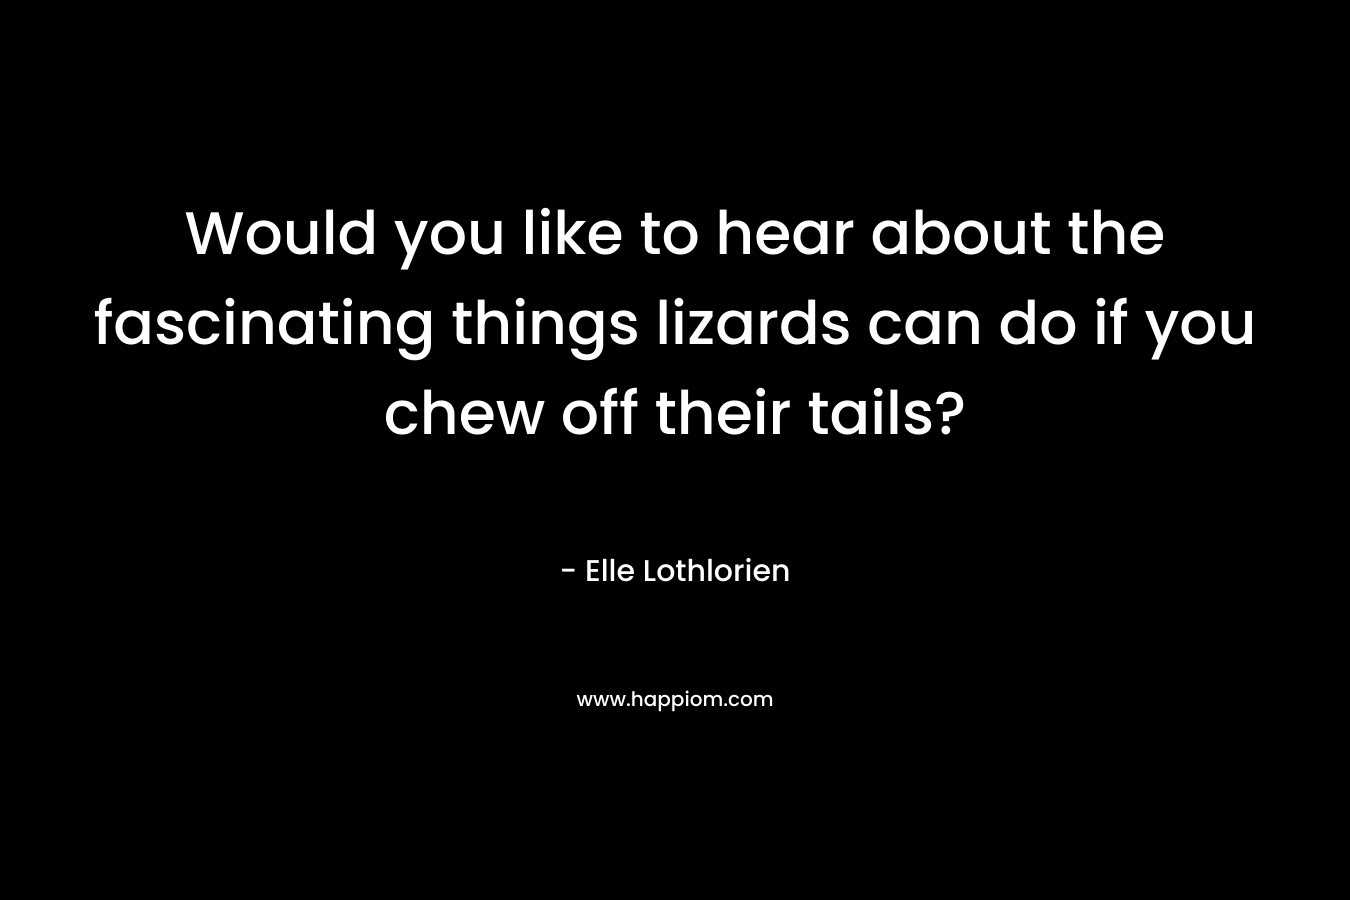 Would you like to hear about the fascinating things lizards can do if you chew off their tails?